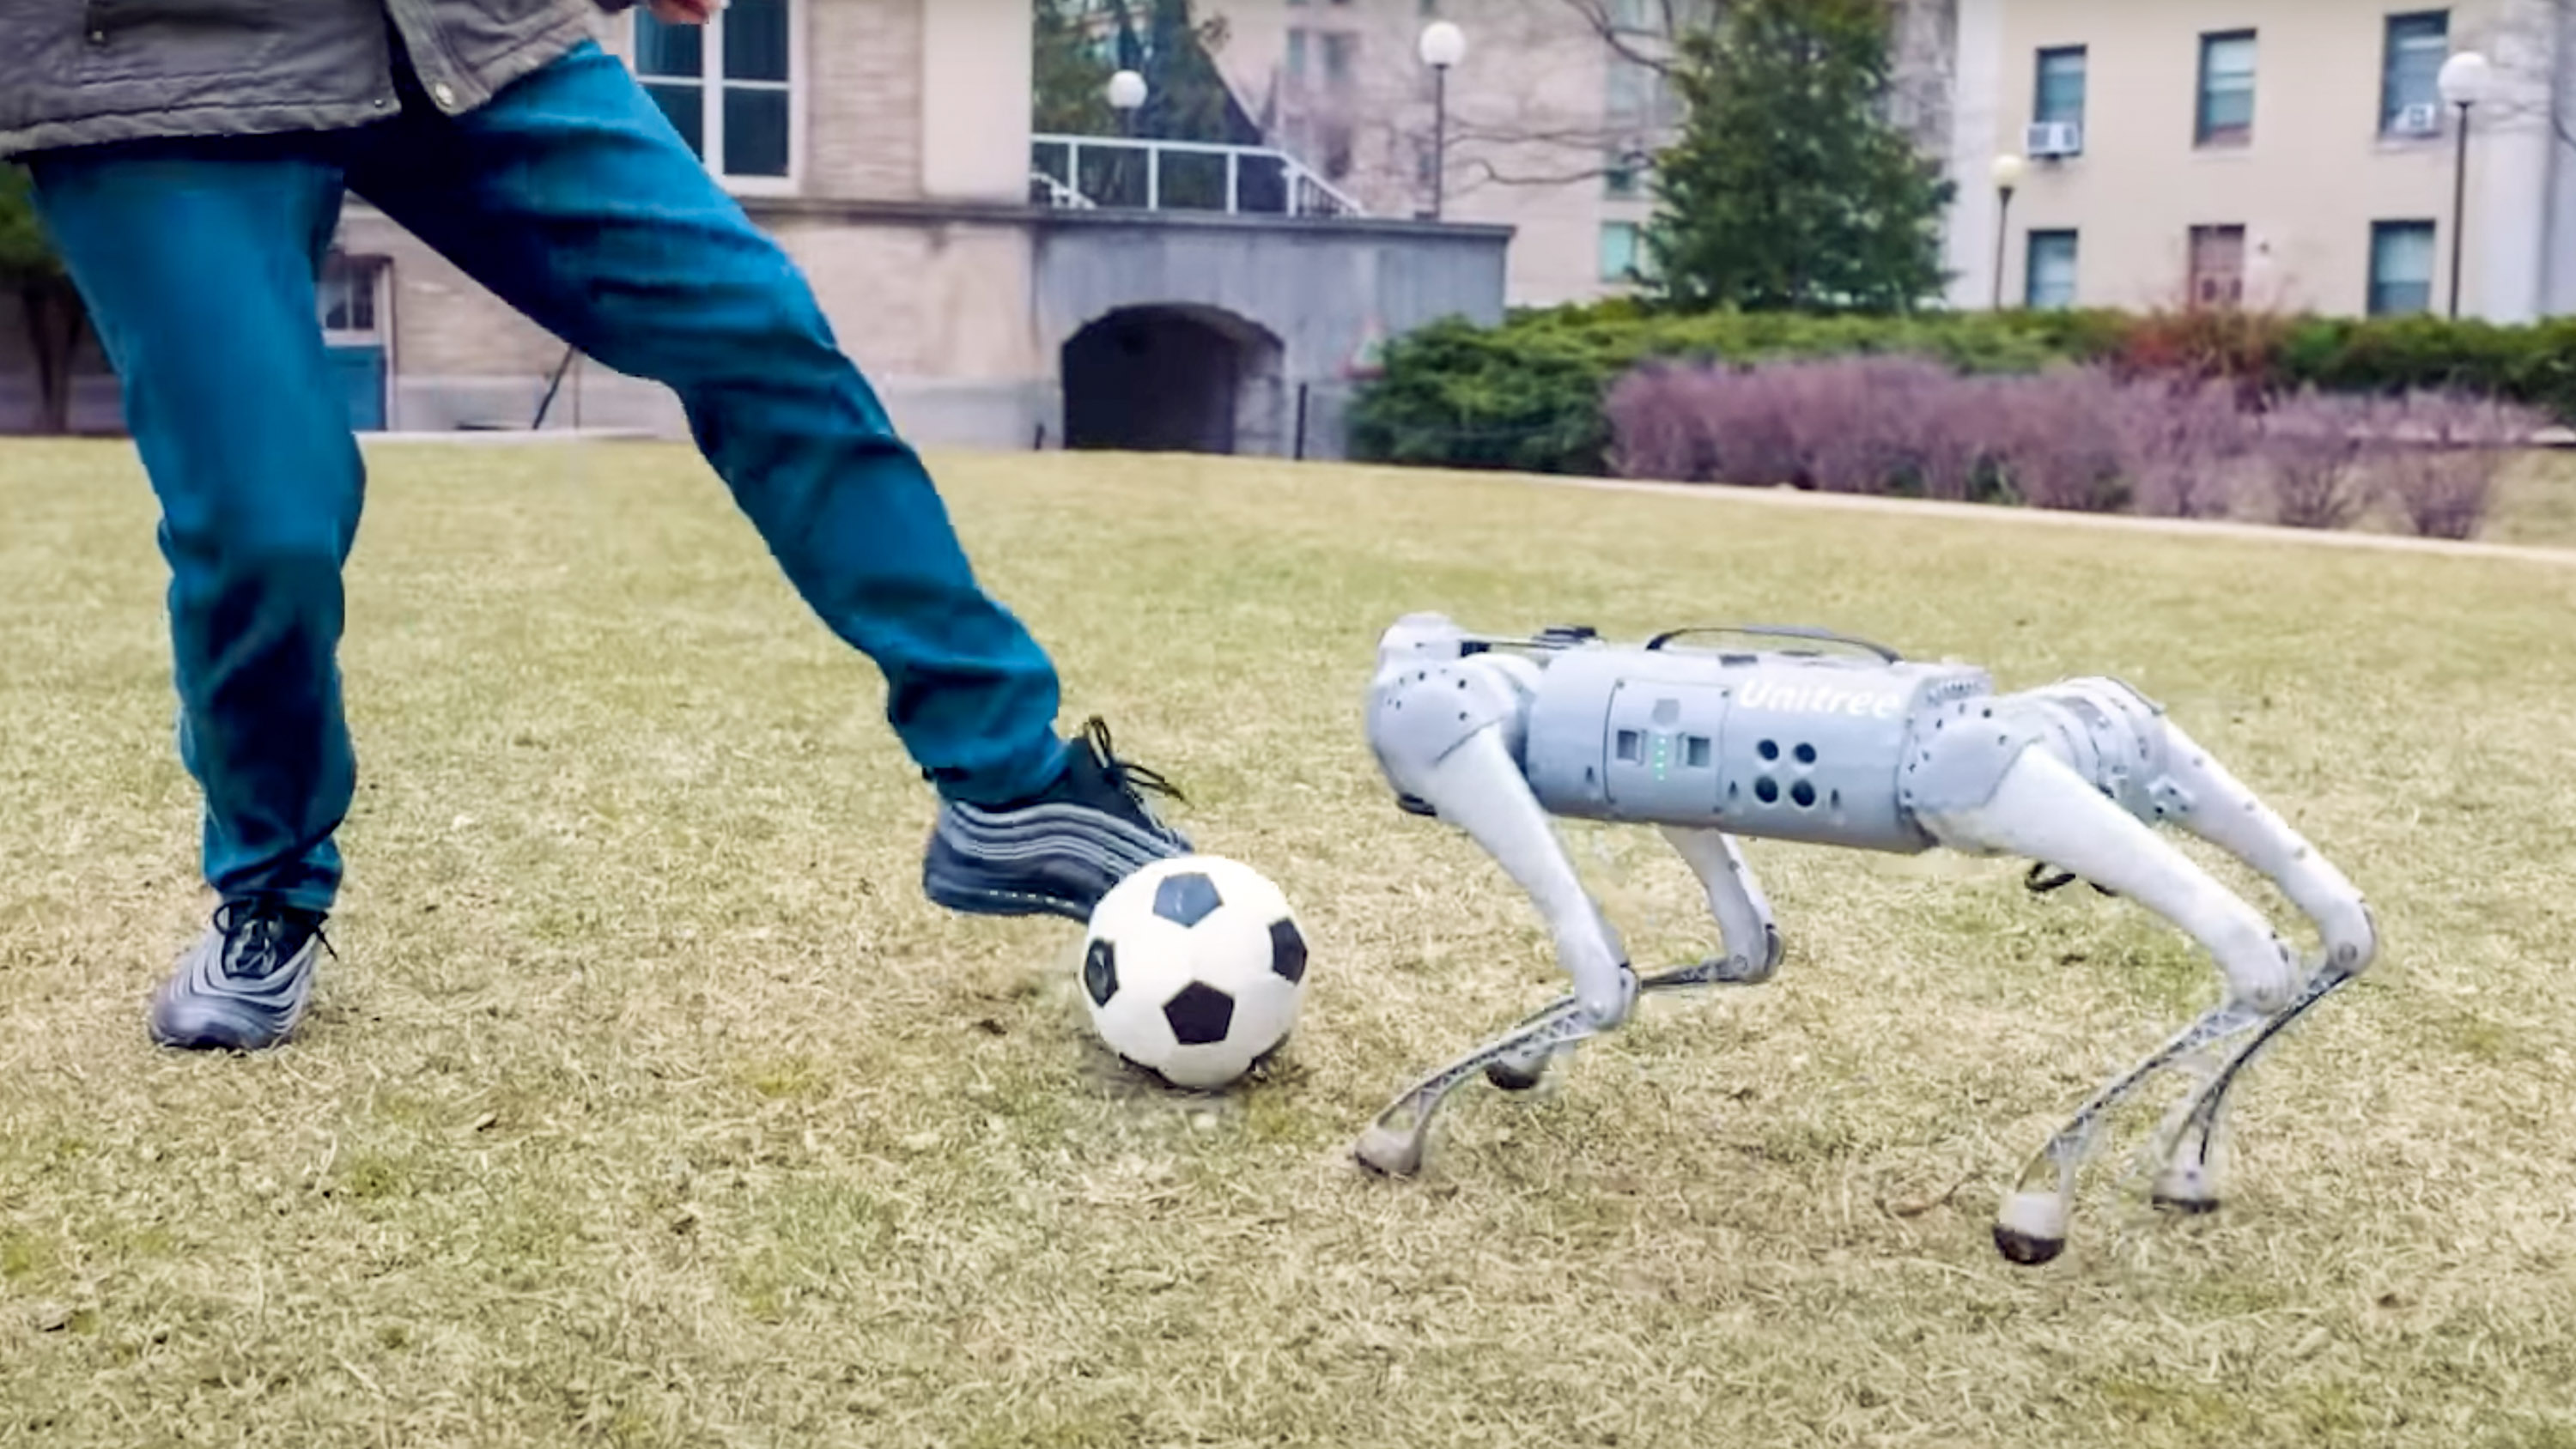 close up on a person's legs kicking a soccer ball toward a four-legged robot on a campus lawn